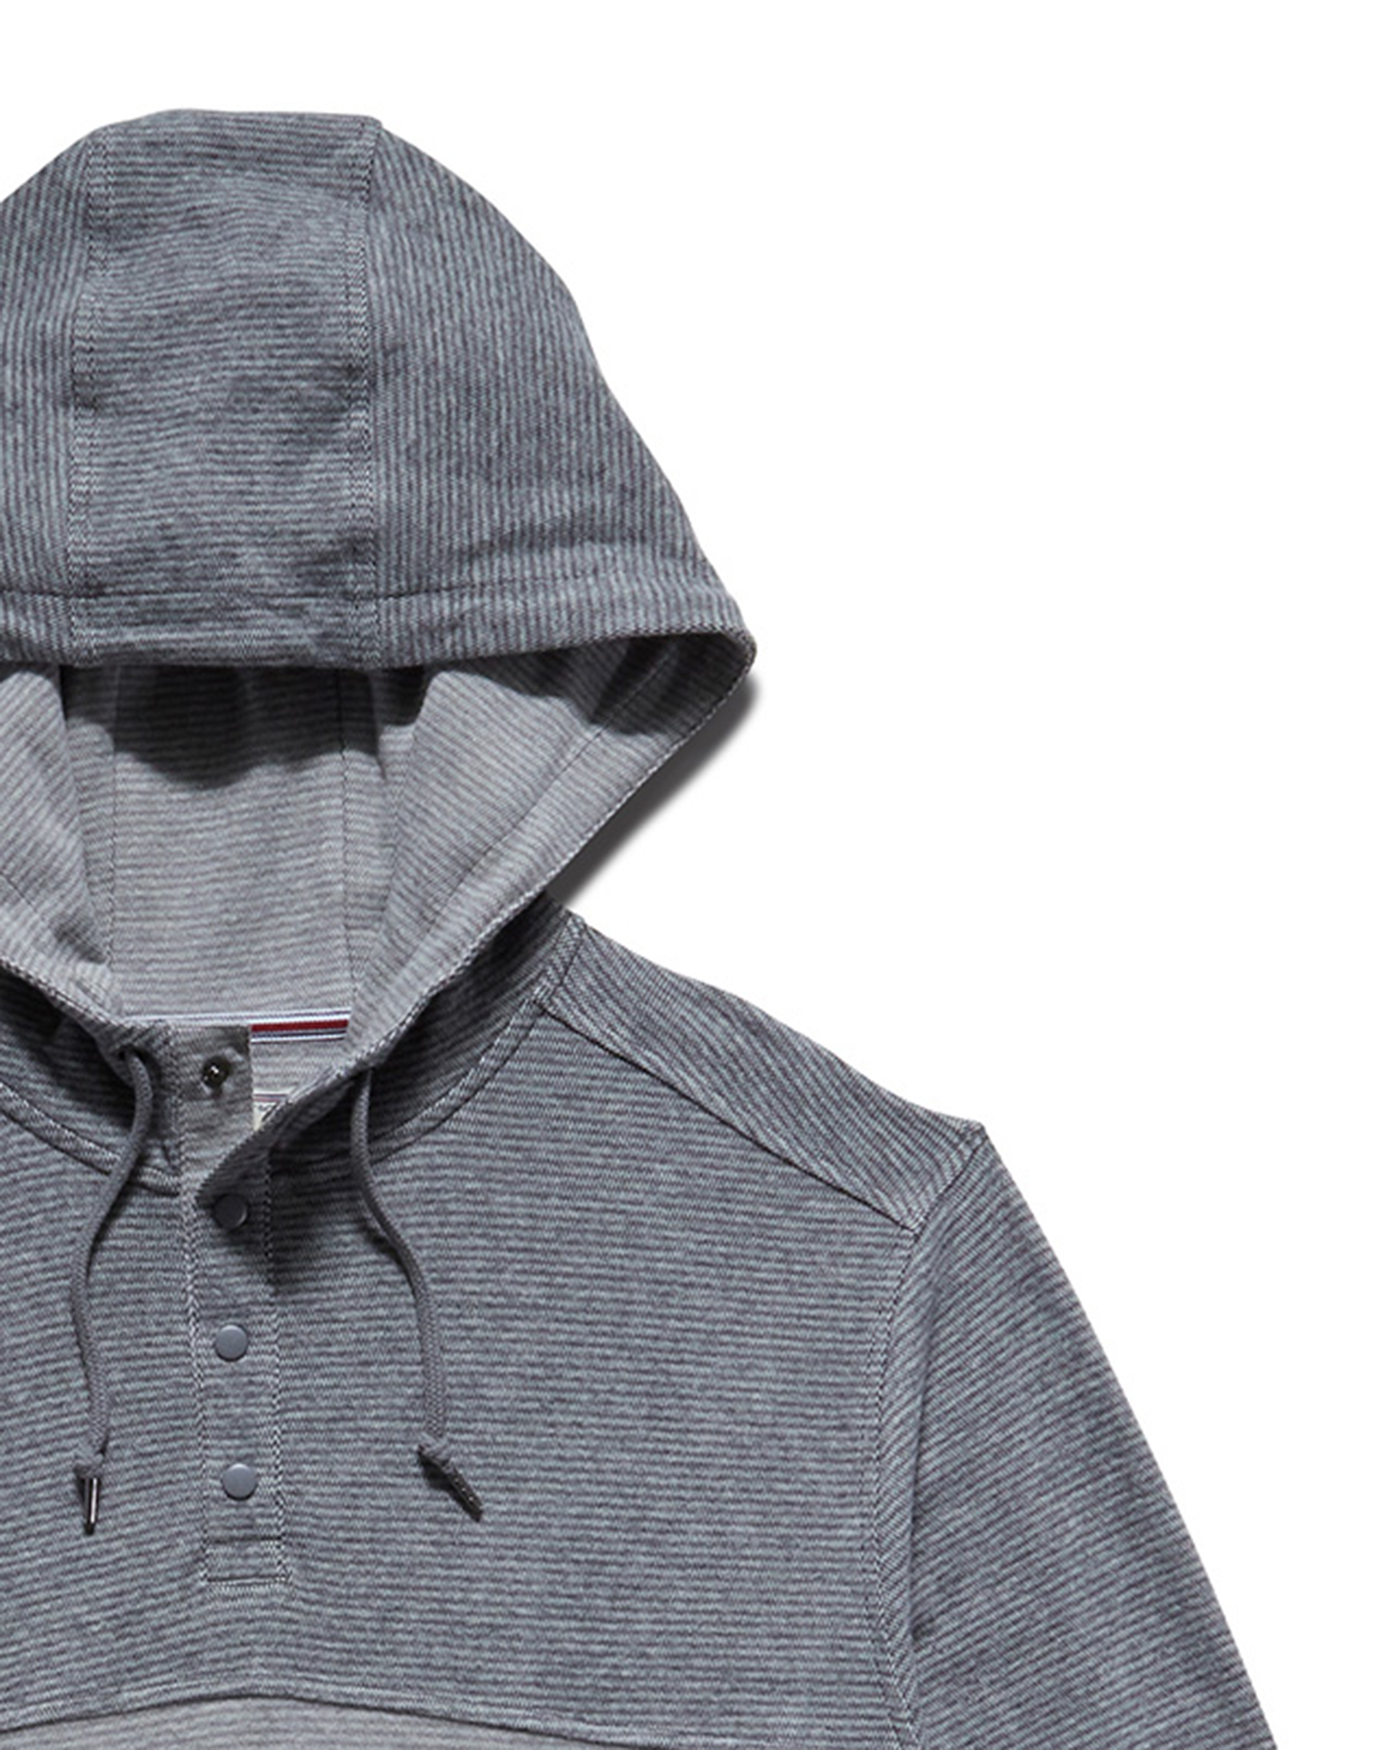 HIGHFILL SUPER-SOFT COLORBLOCK HOODED HENLEY